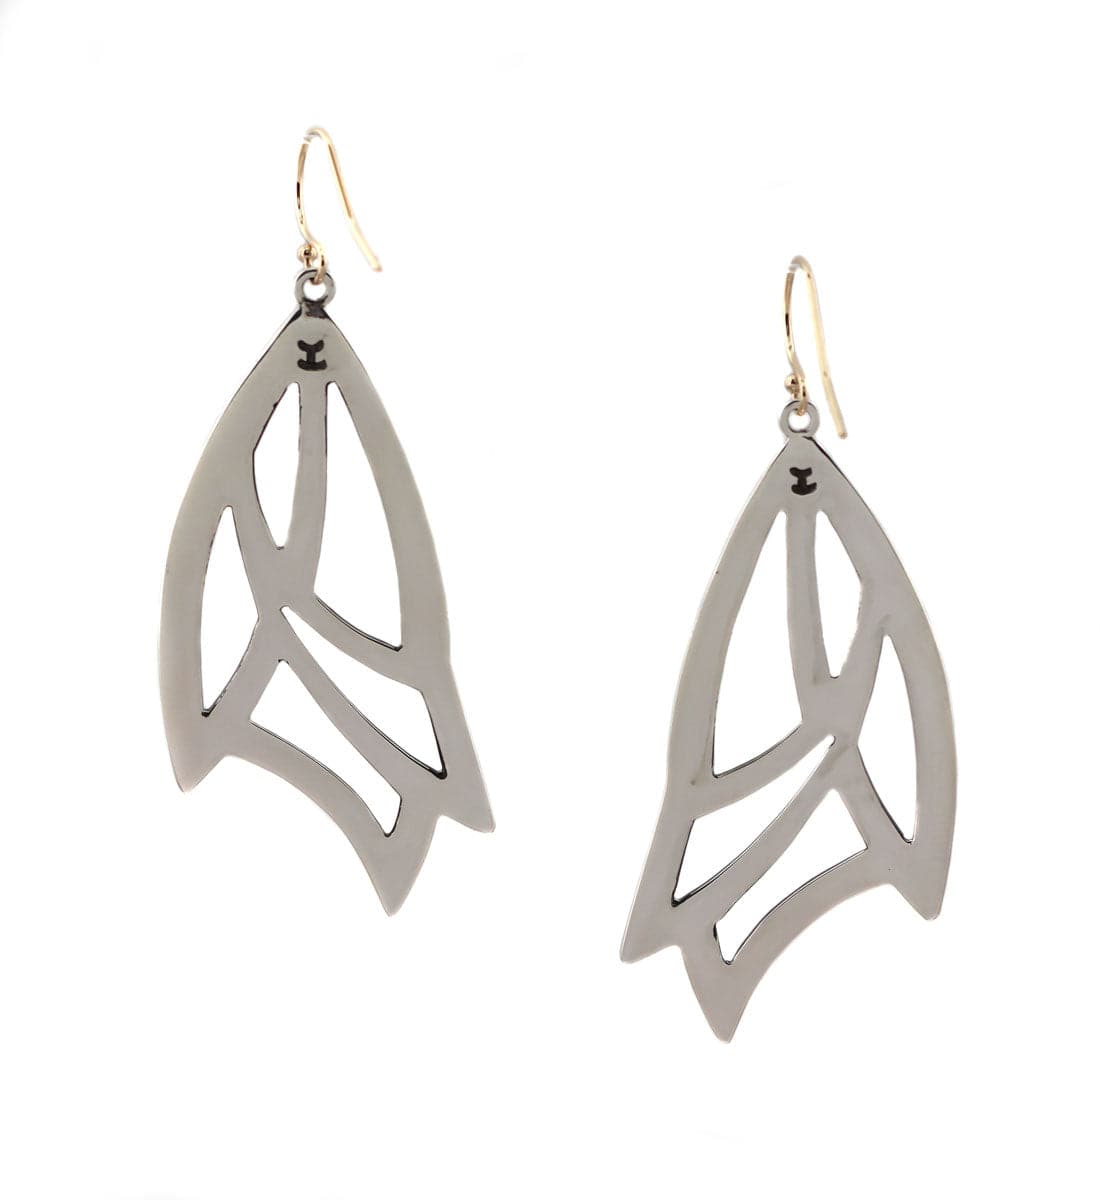 Jared Chavez - San Felipe Contemporary Silver Silhouette Series French Hook Earrings, 2.125" x 1.125" (J14464) 1